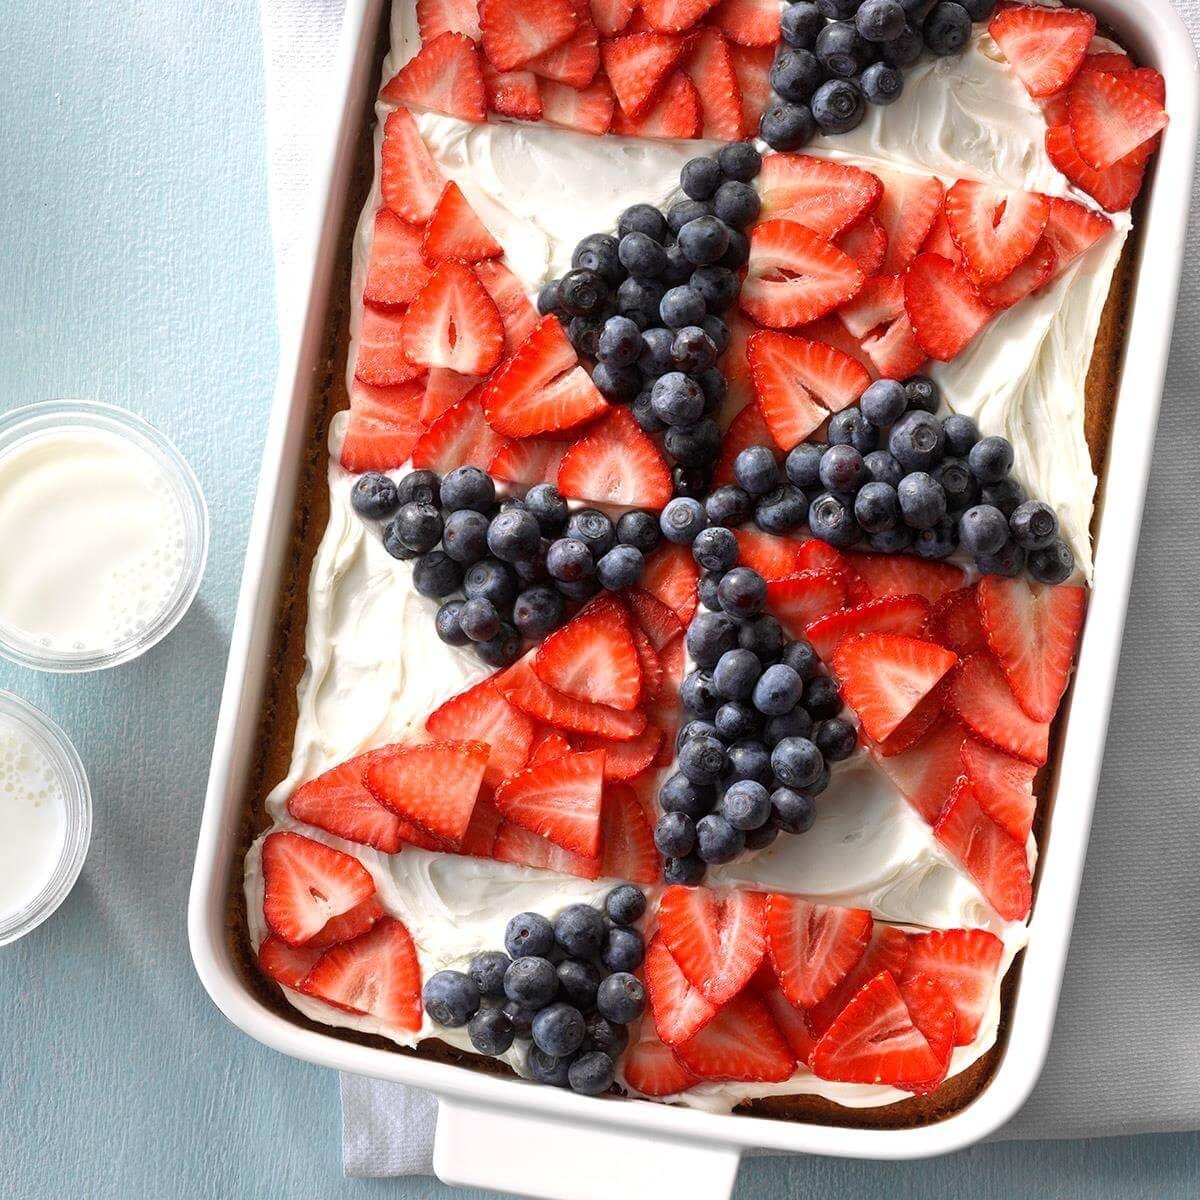 Red, White and Blue Desserts You'll Want to Make